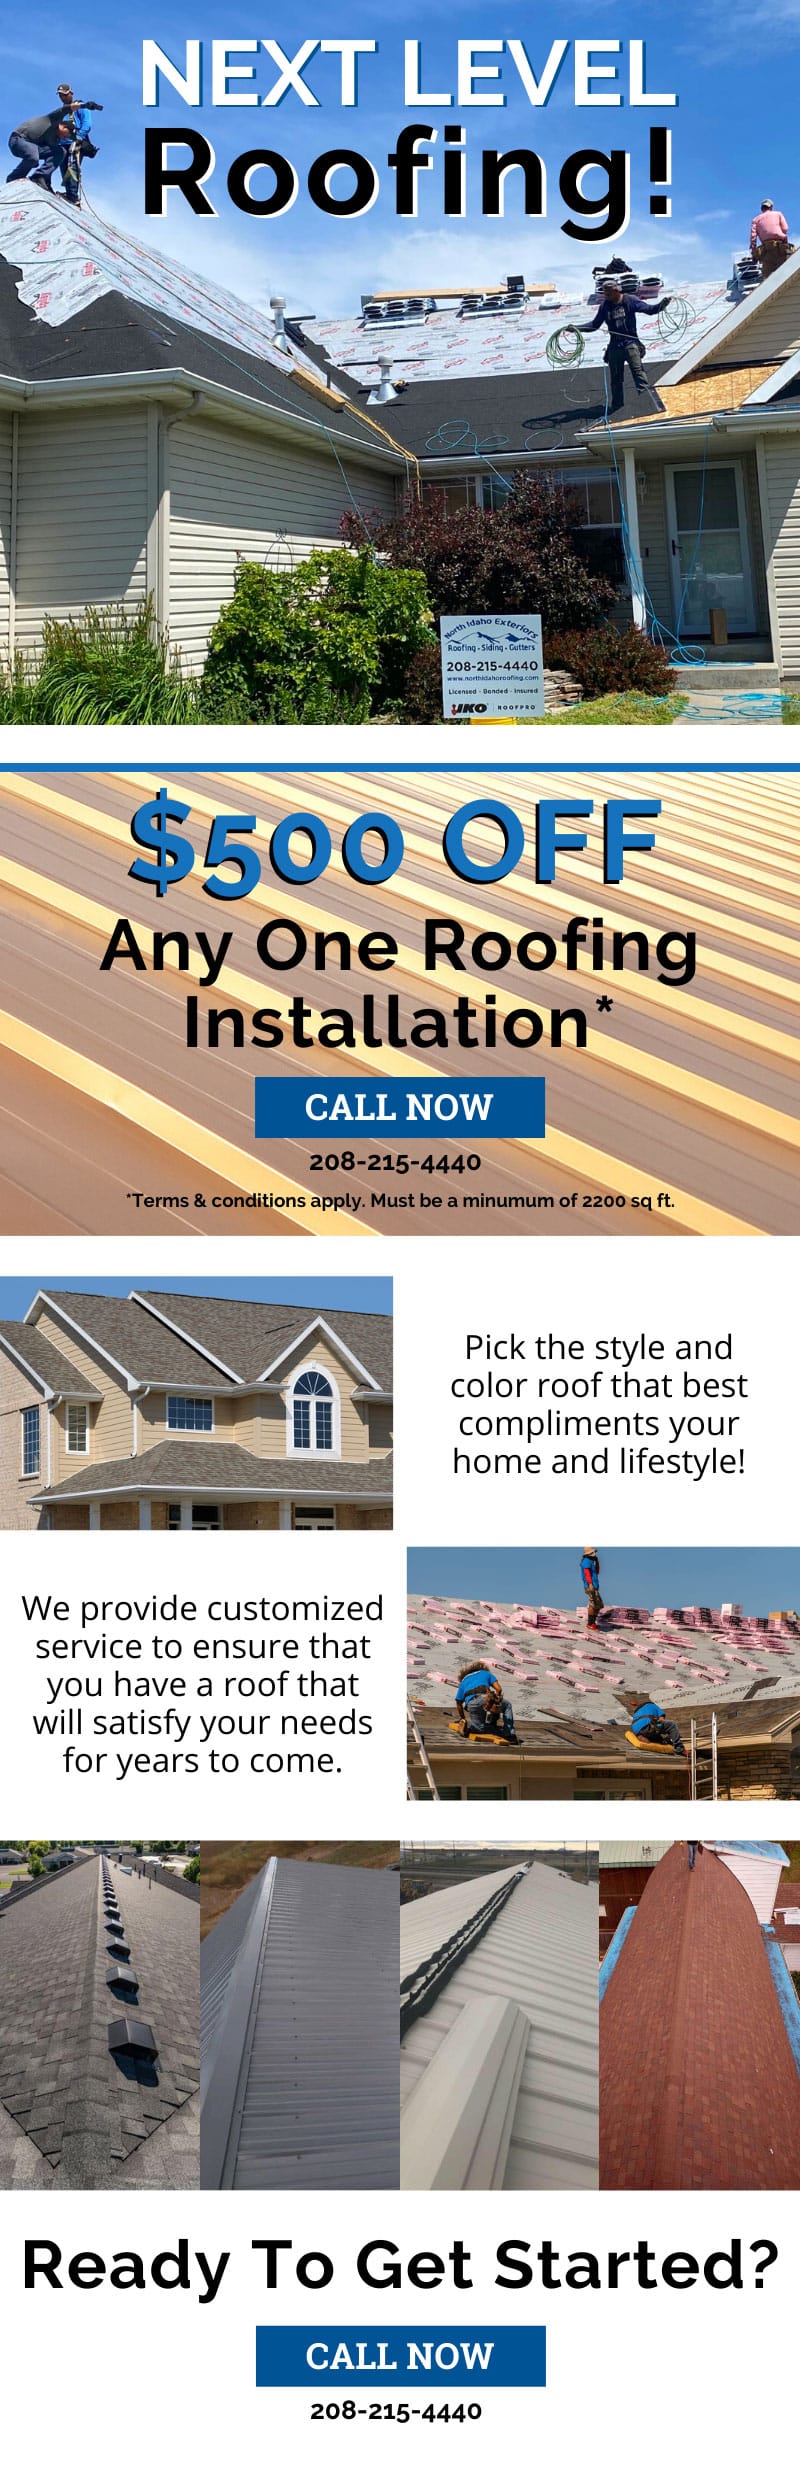 Next Level Roofing Infographic